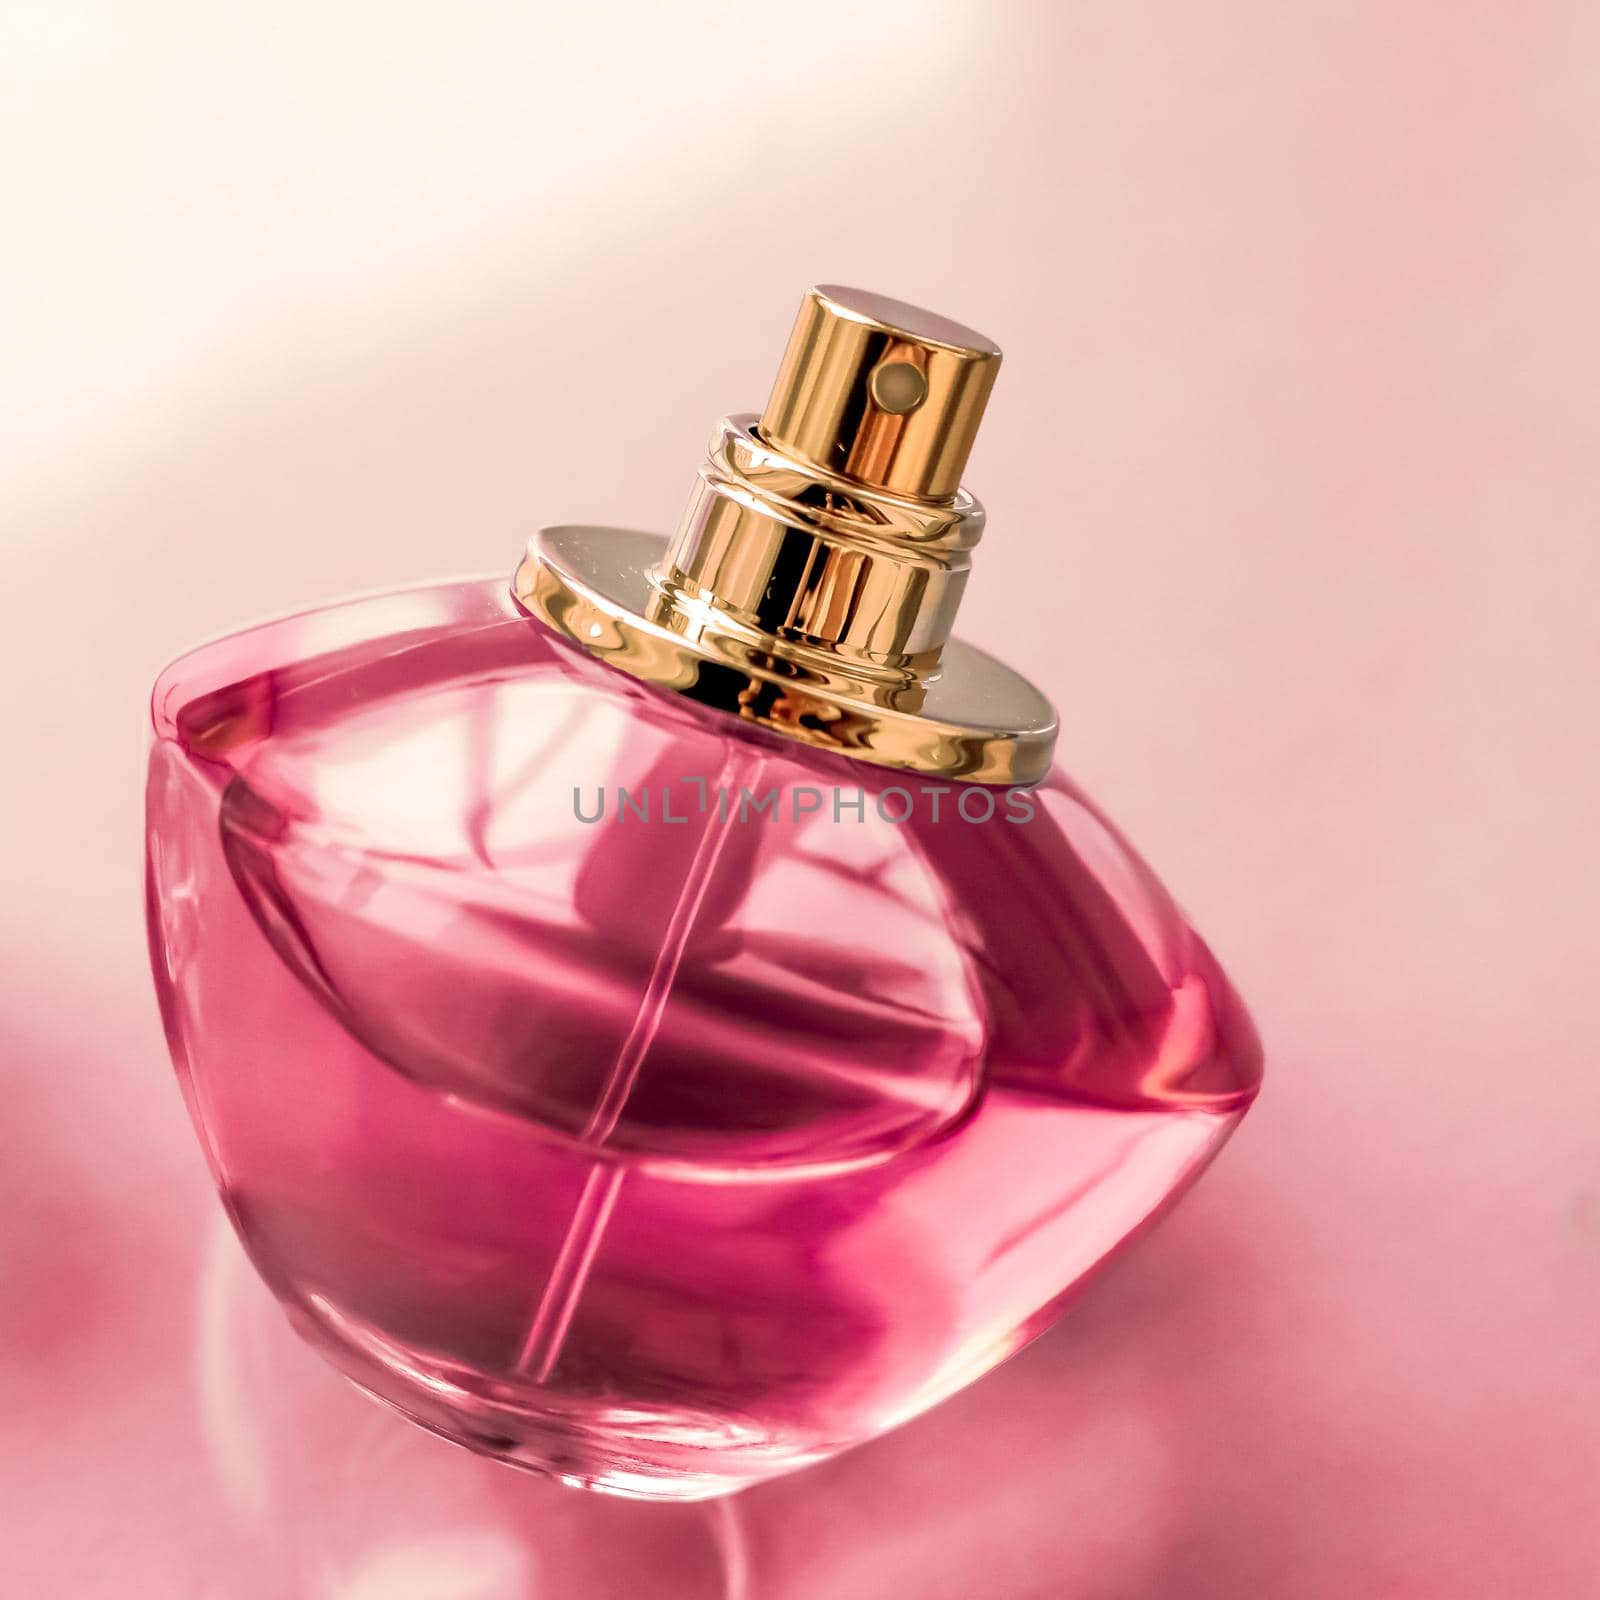 Perfumery, spa and branding concept - Pink perfume bottle on glossy background, sweet floral scent, glamour fragrance and eau de parfum as holiday gift and luxury beauty cosmetics brand design